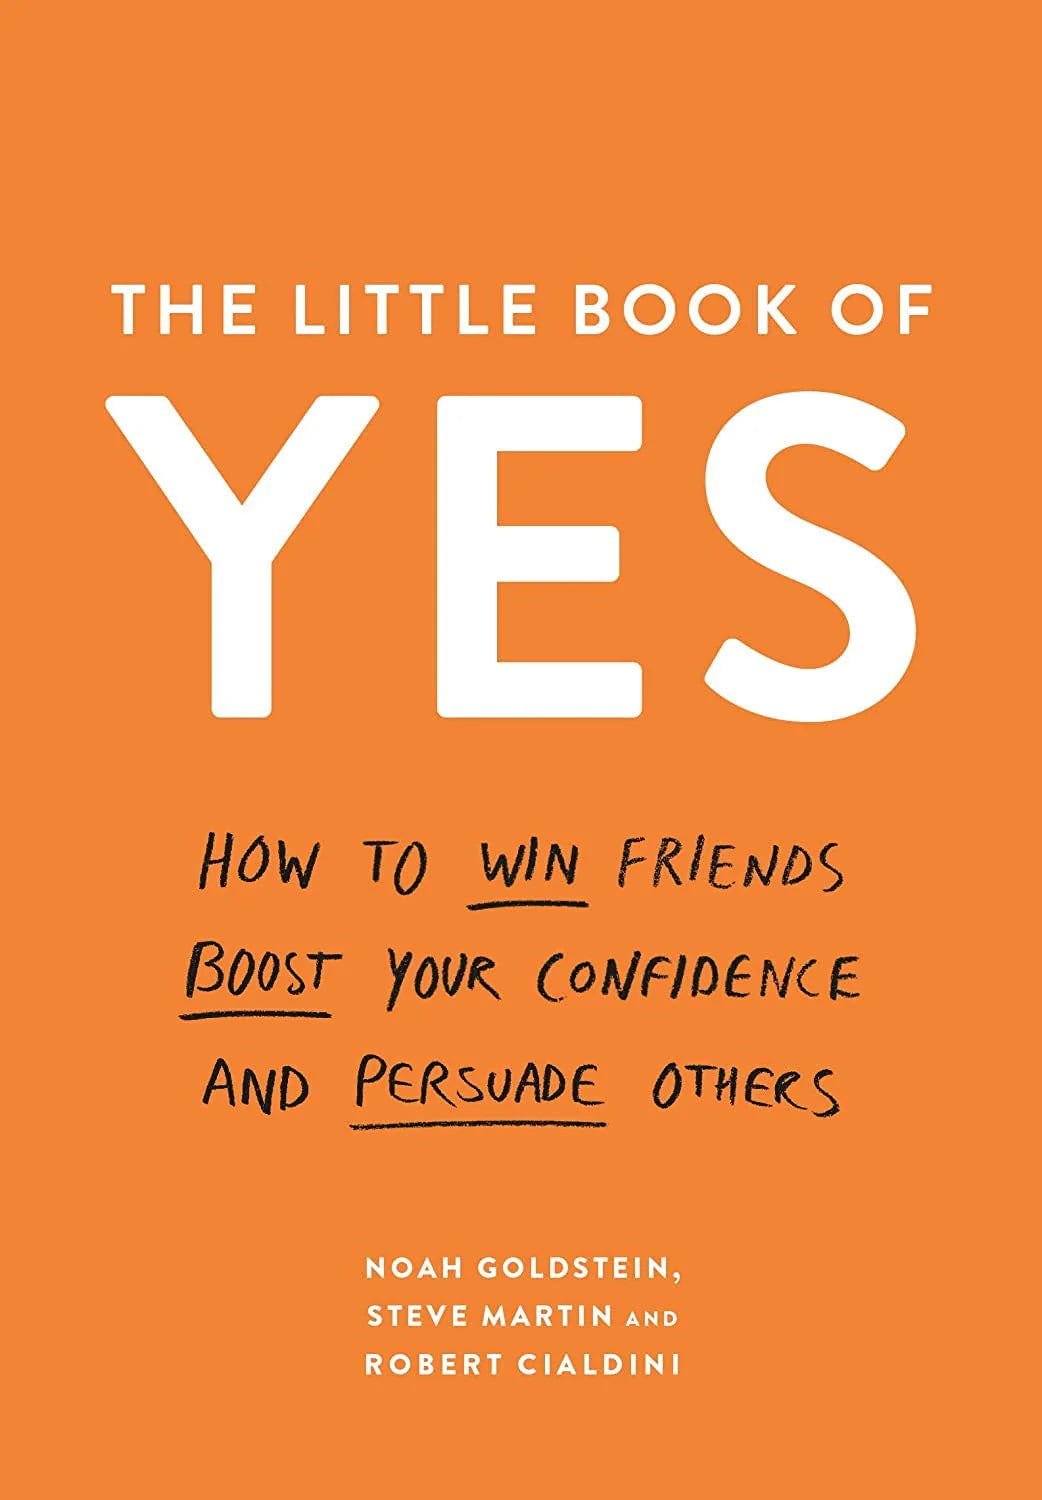 THE LITTLE BOOK OF YES by Noah Goldstein & Steve Martin